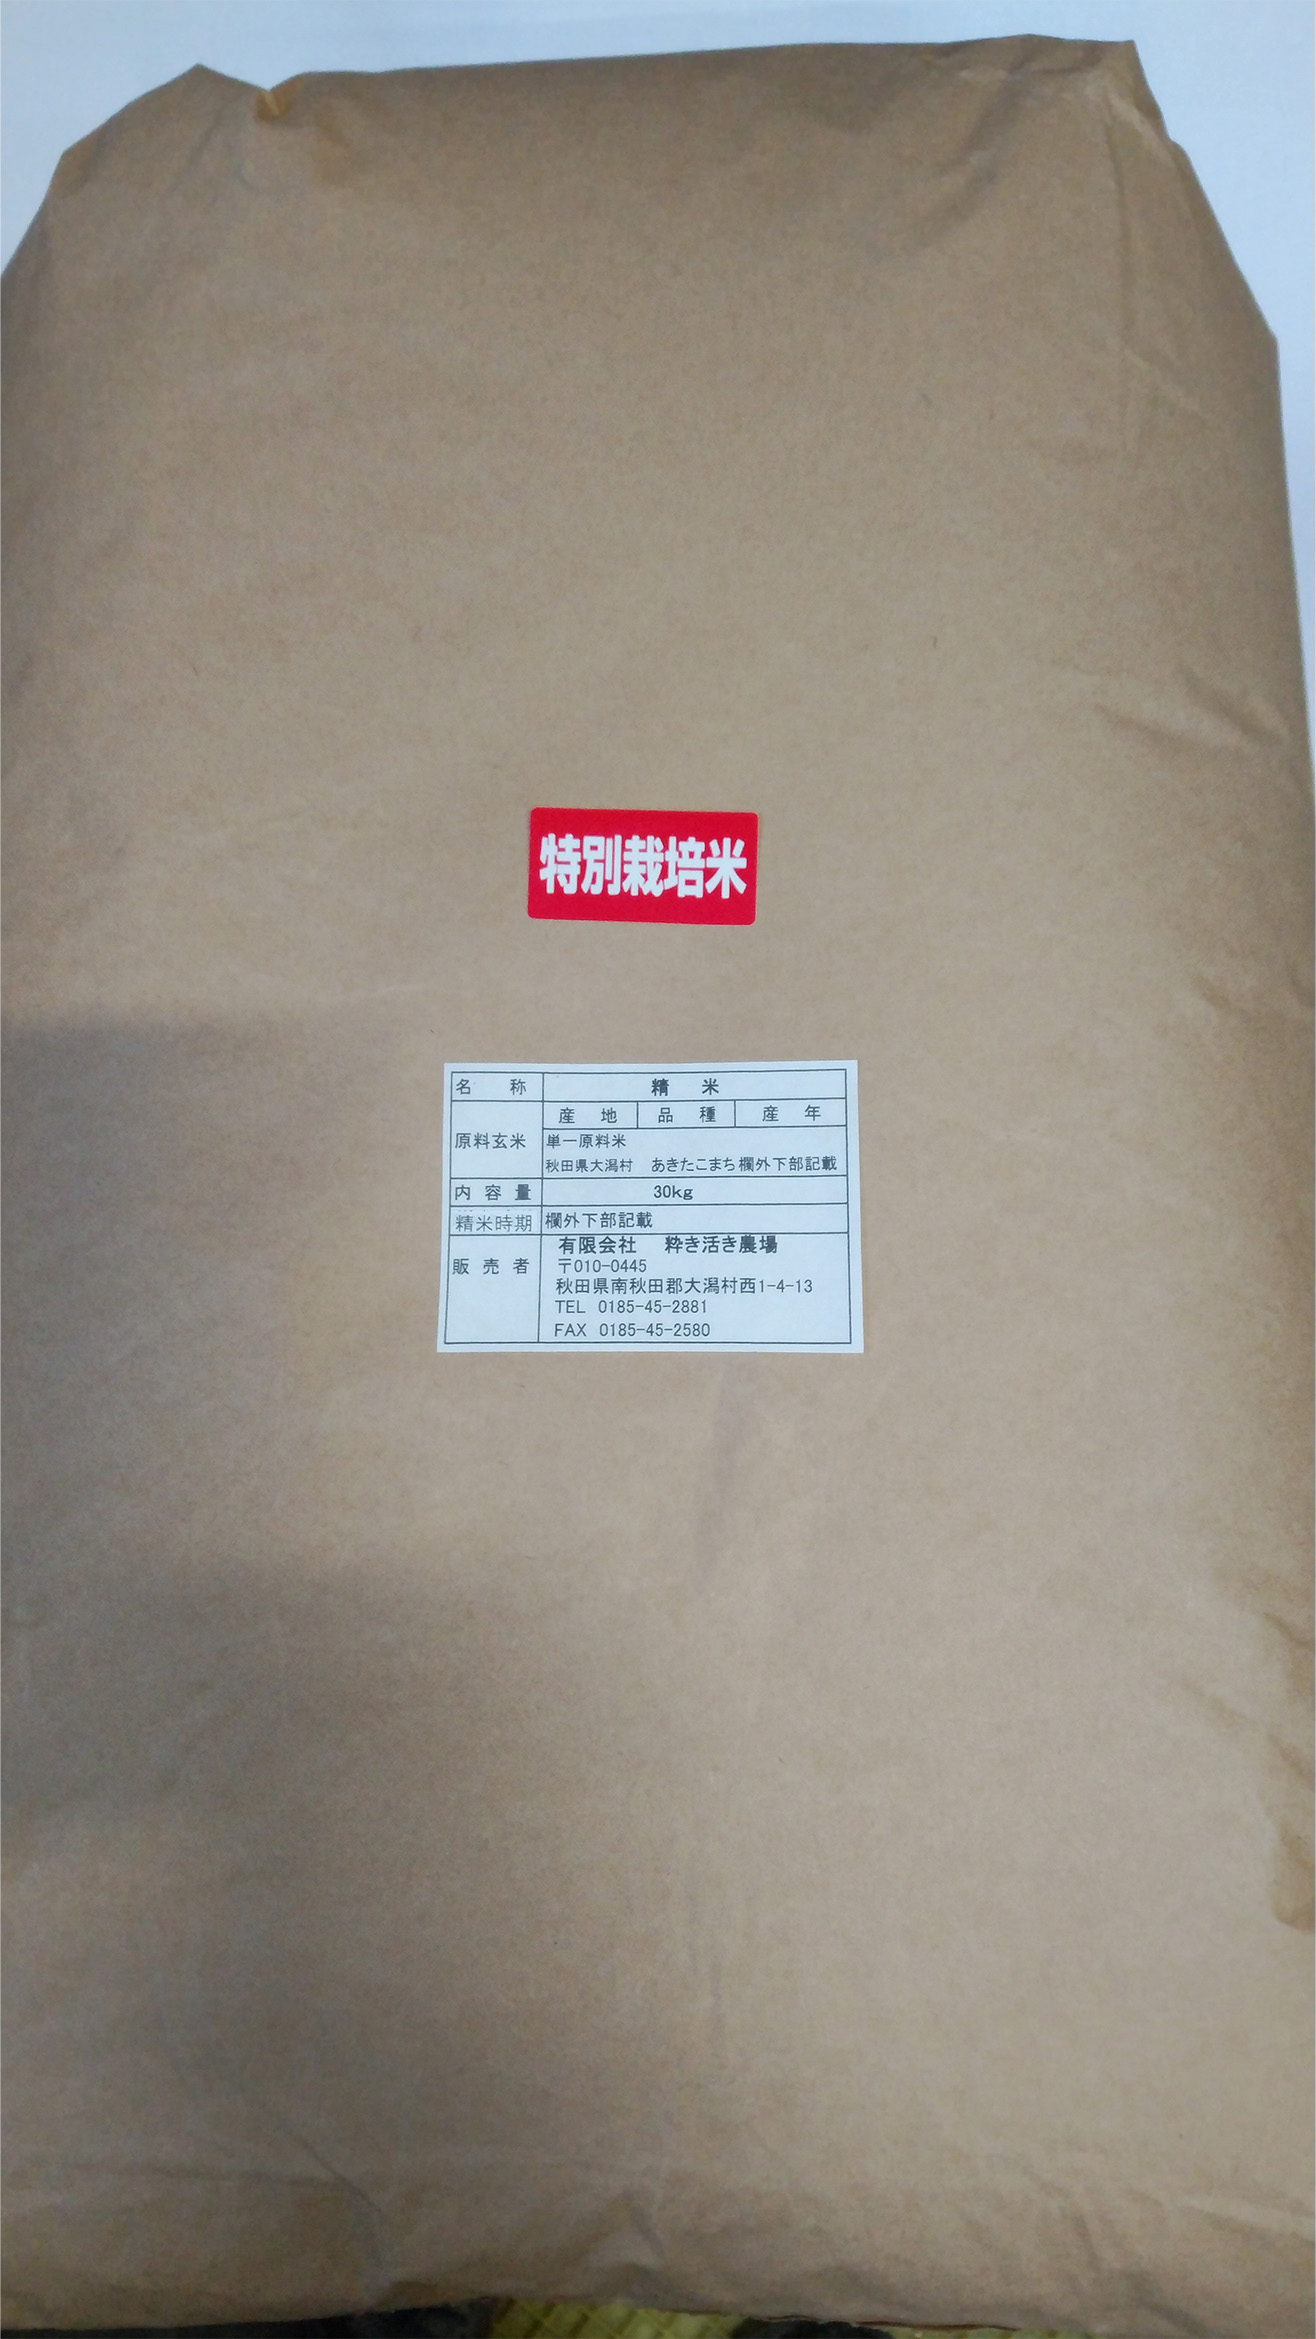 Specially cultivated rice Akitakomachi white rice 30kg